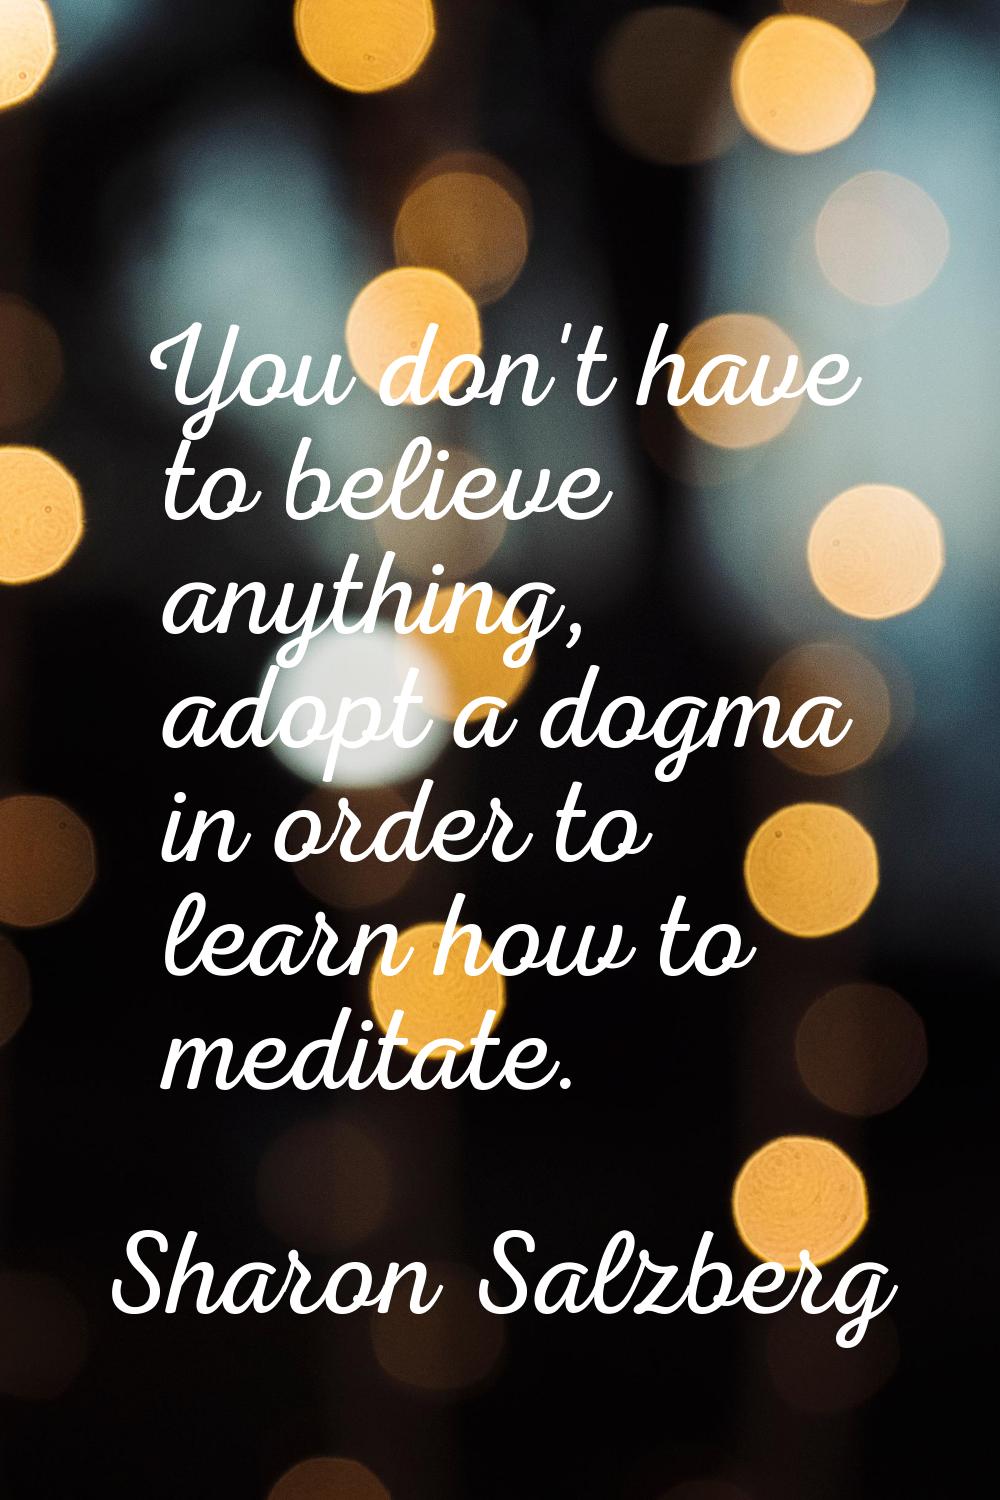 You don't have to believe anything, adopt a dogma in order to learn how to meditate.